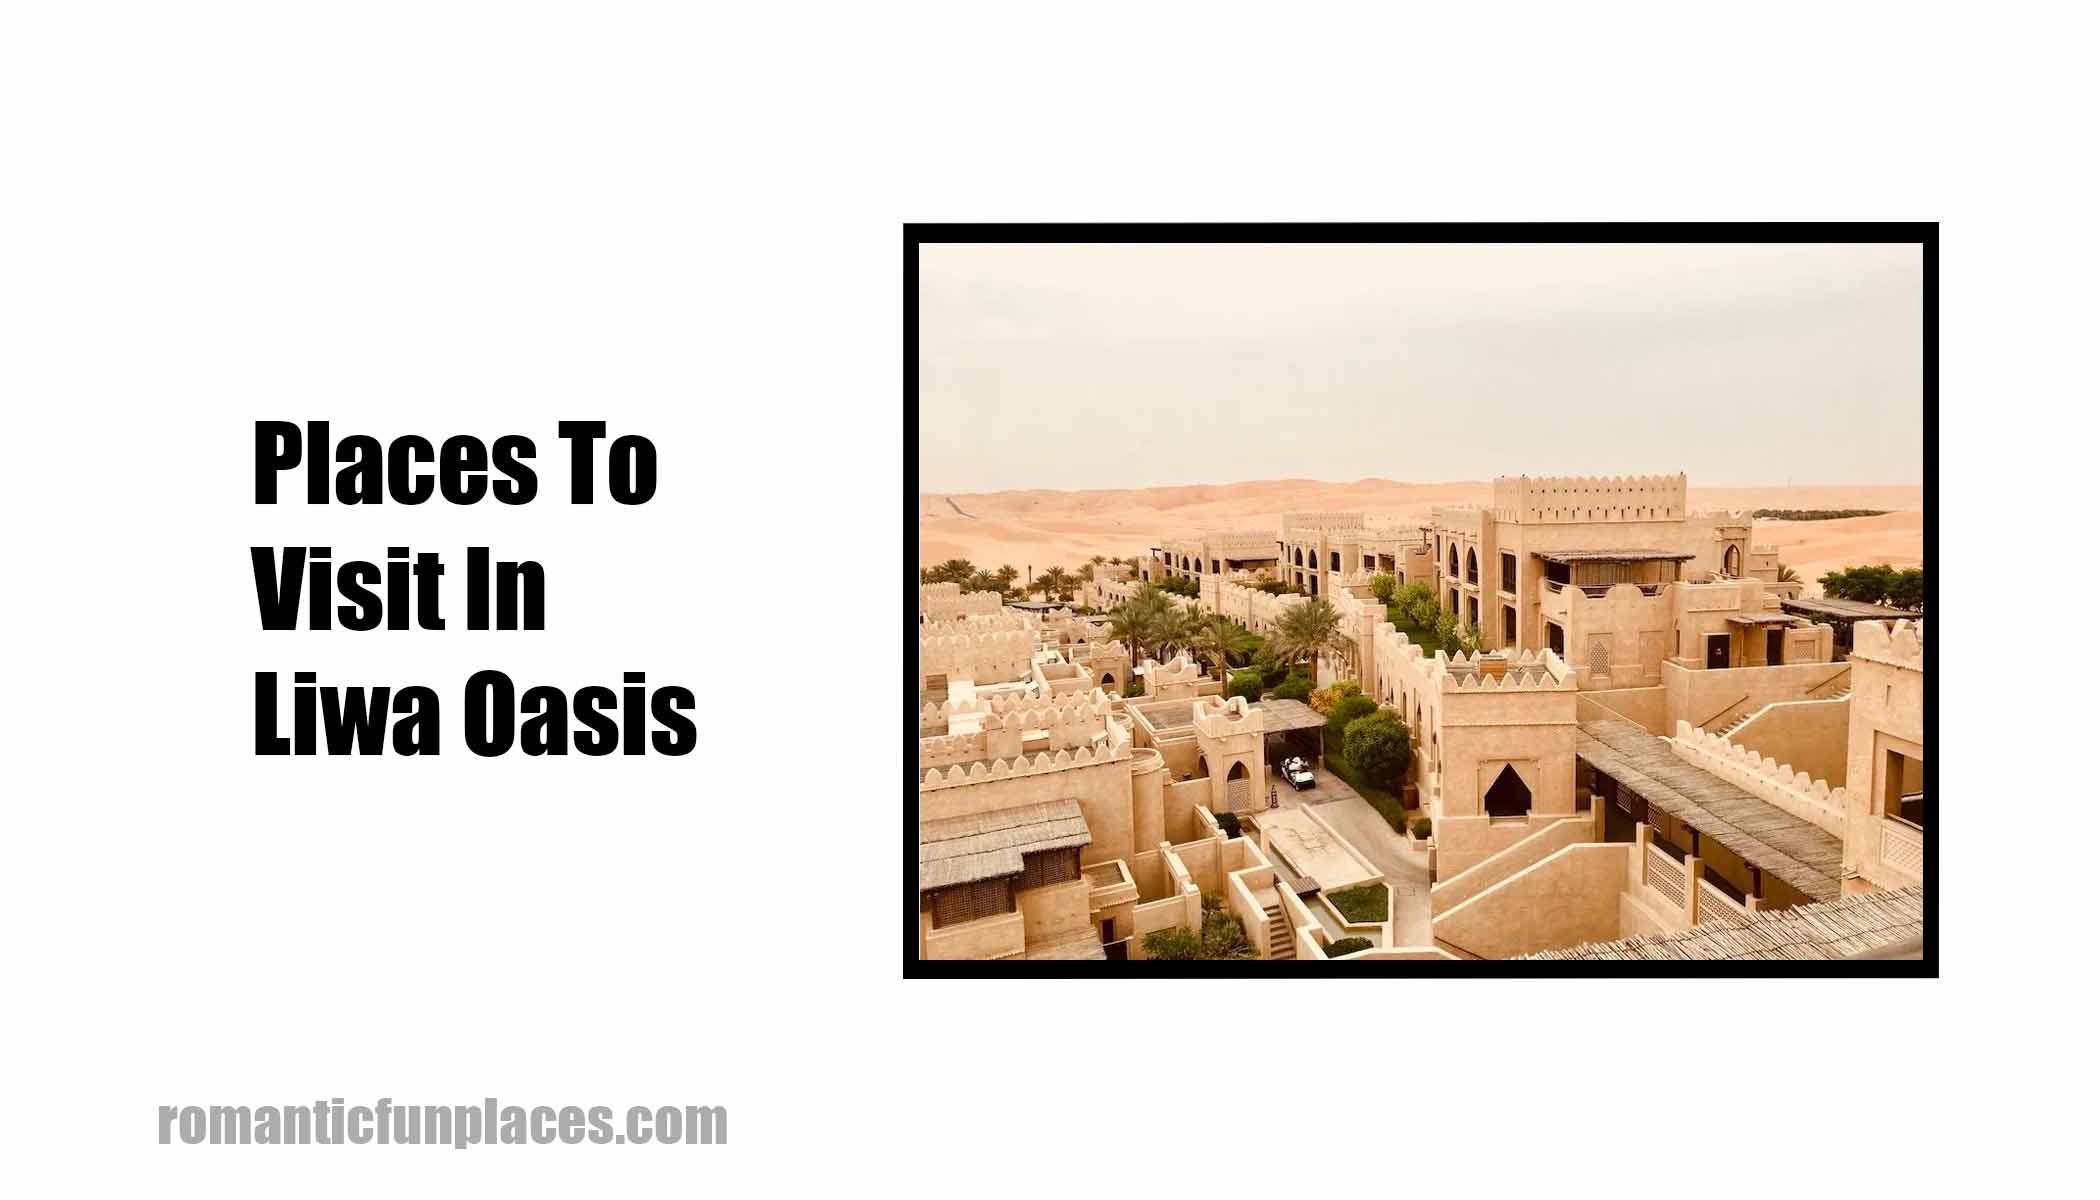 Places To Visit In Liwa Oasis